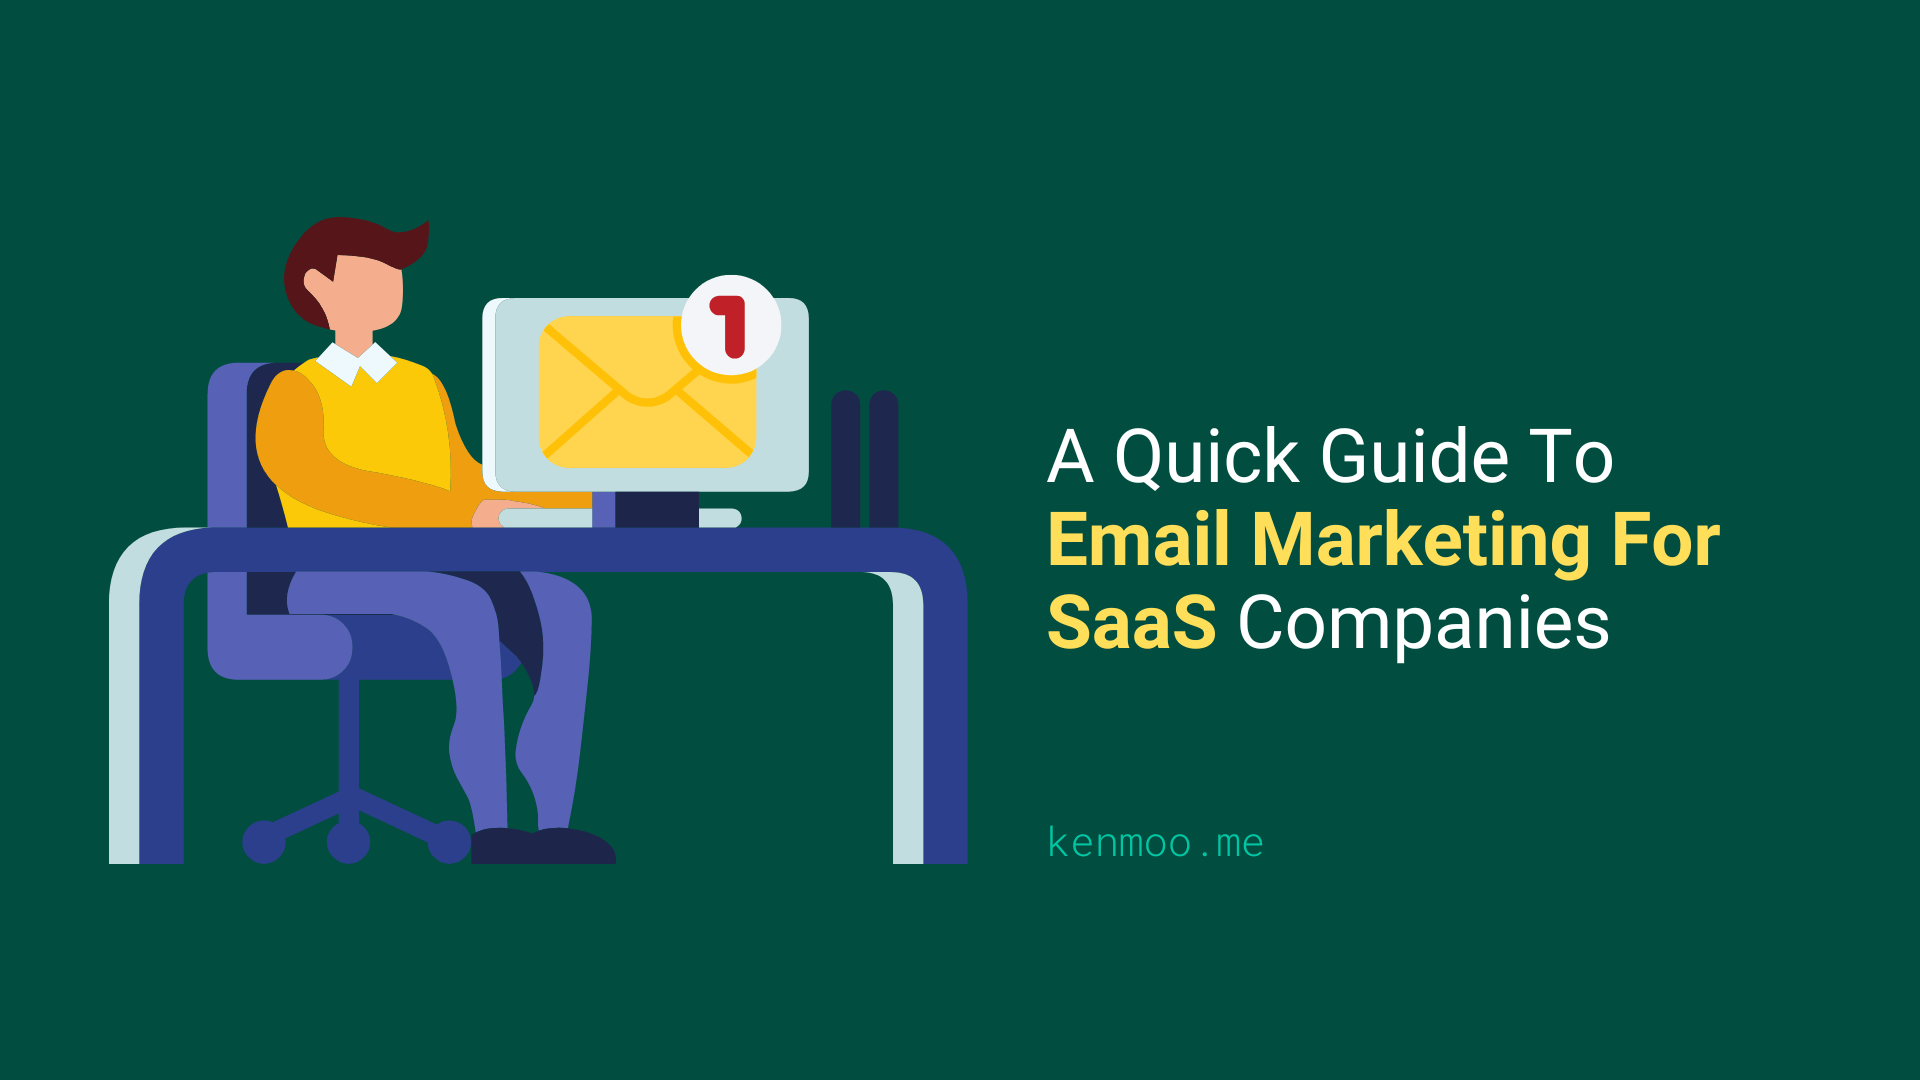 A Quick Guide To Email Marketing For SaaS Companies